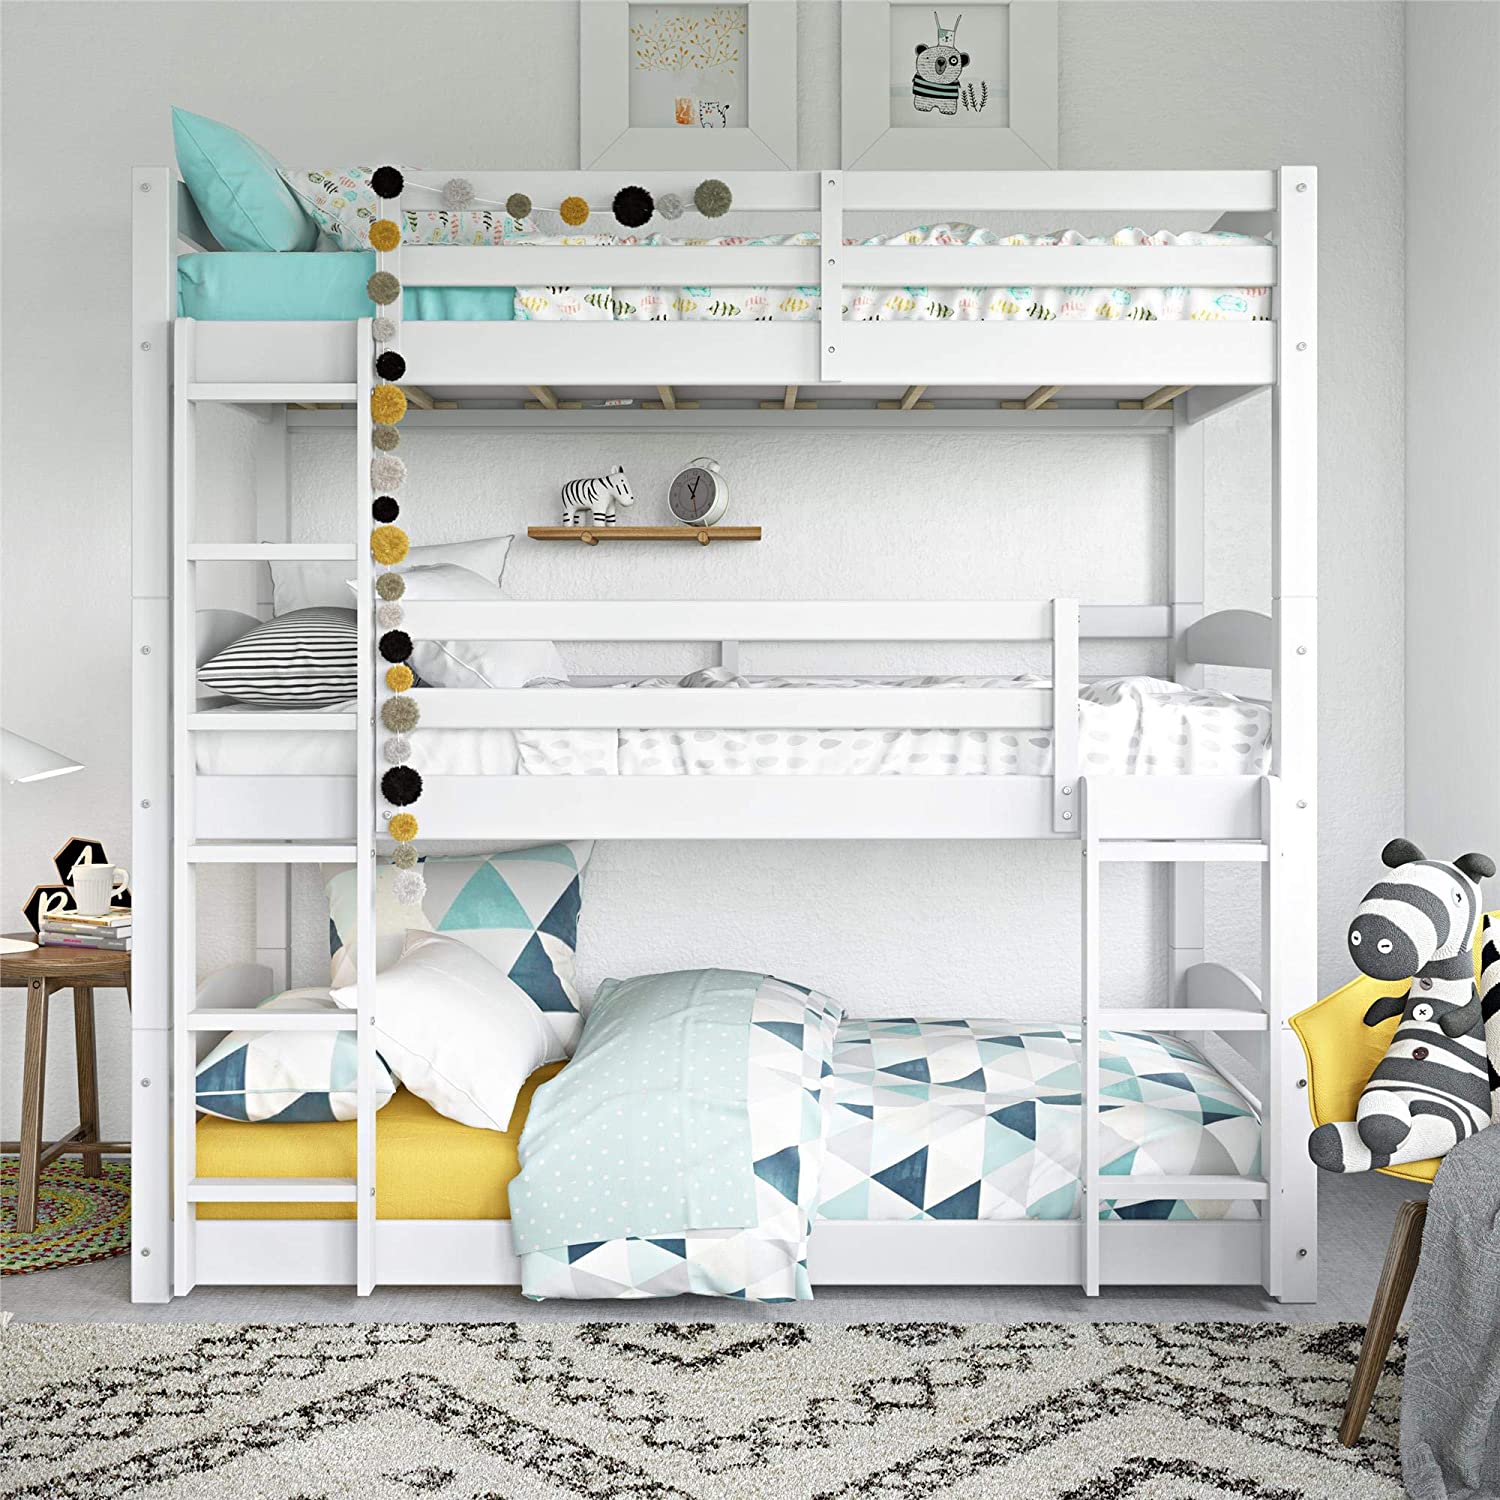 26 Bunk Beds You Ll Want For Yourself, Best Bunk Beds For Teens